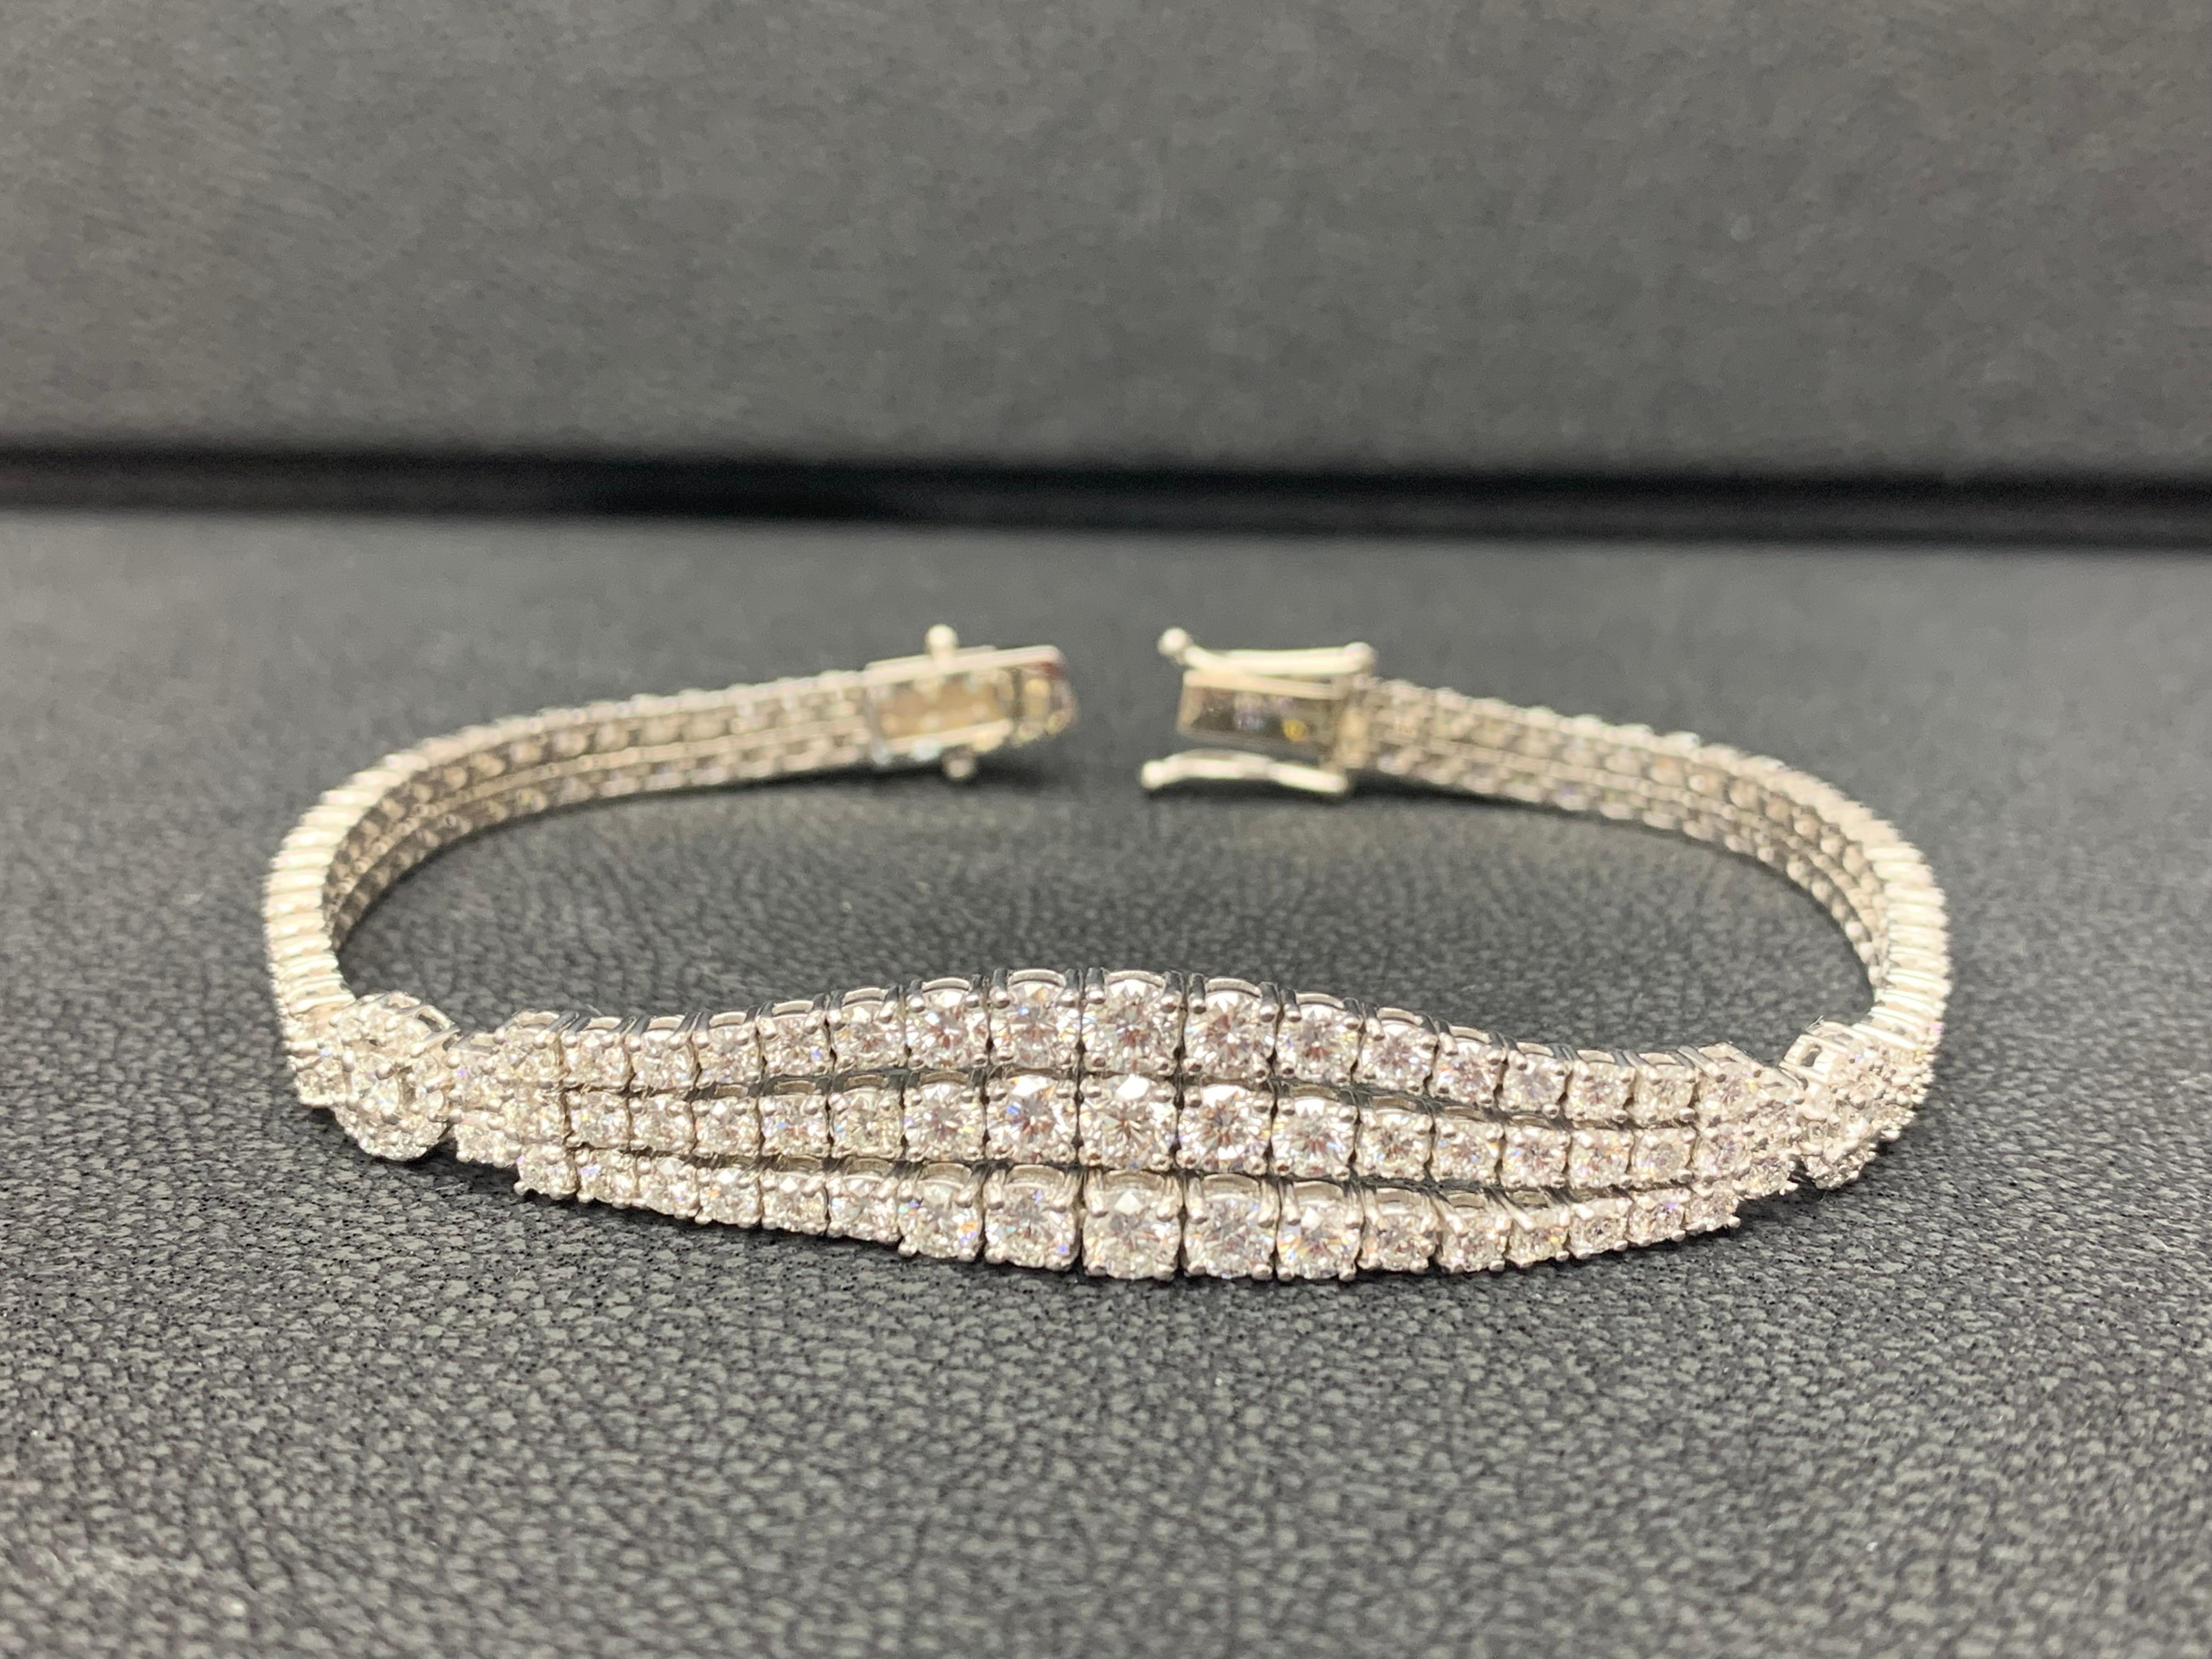 A fashionable and beautiful bracelet showcasing three-rows of  179 brilliant cut  round shape diamonds that graduate larger as it gets to the center. Diamonds weigh 7.09 carats total.  Made in 14k white gold.